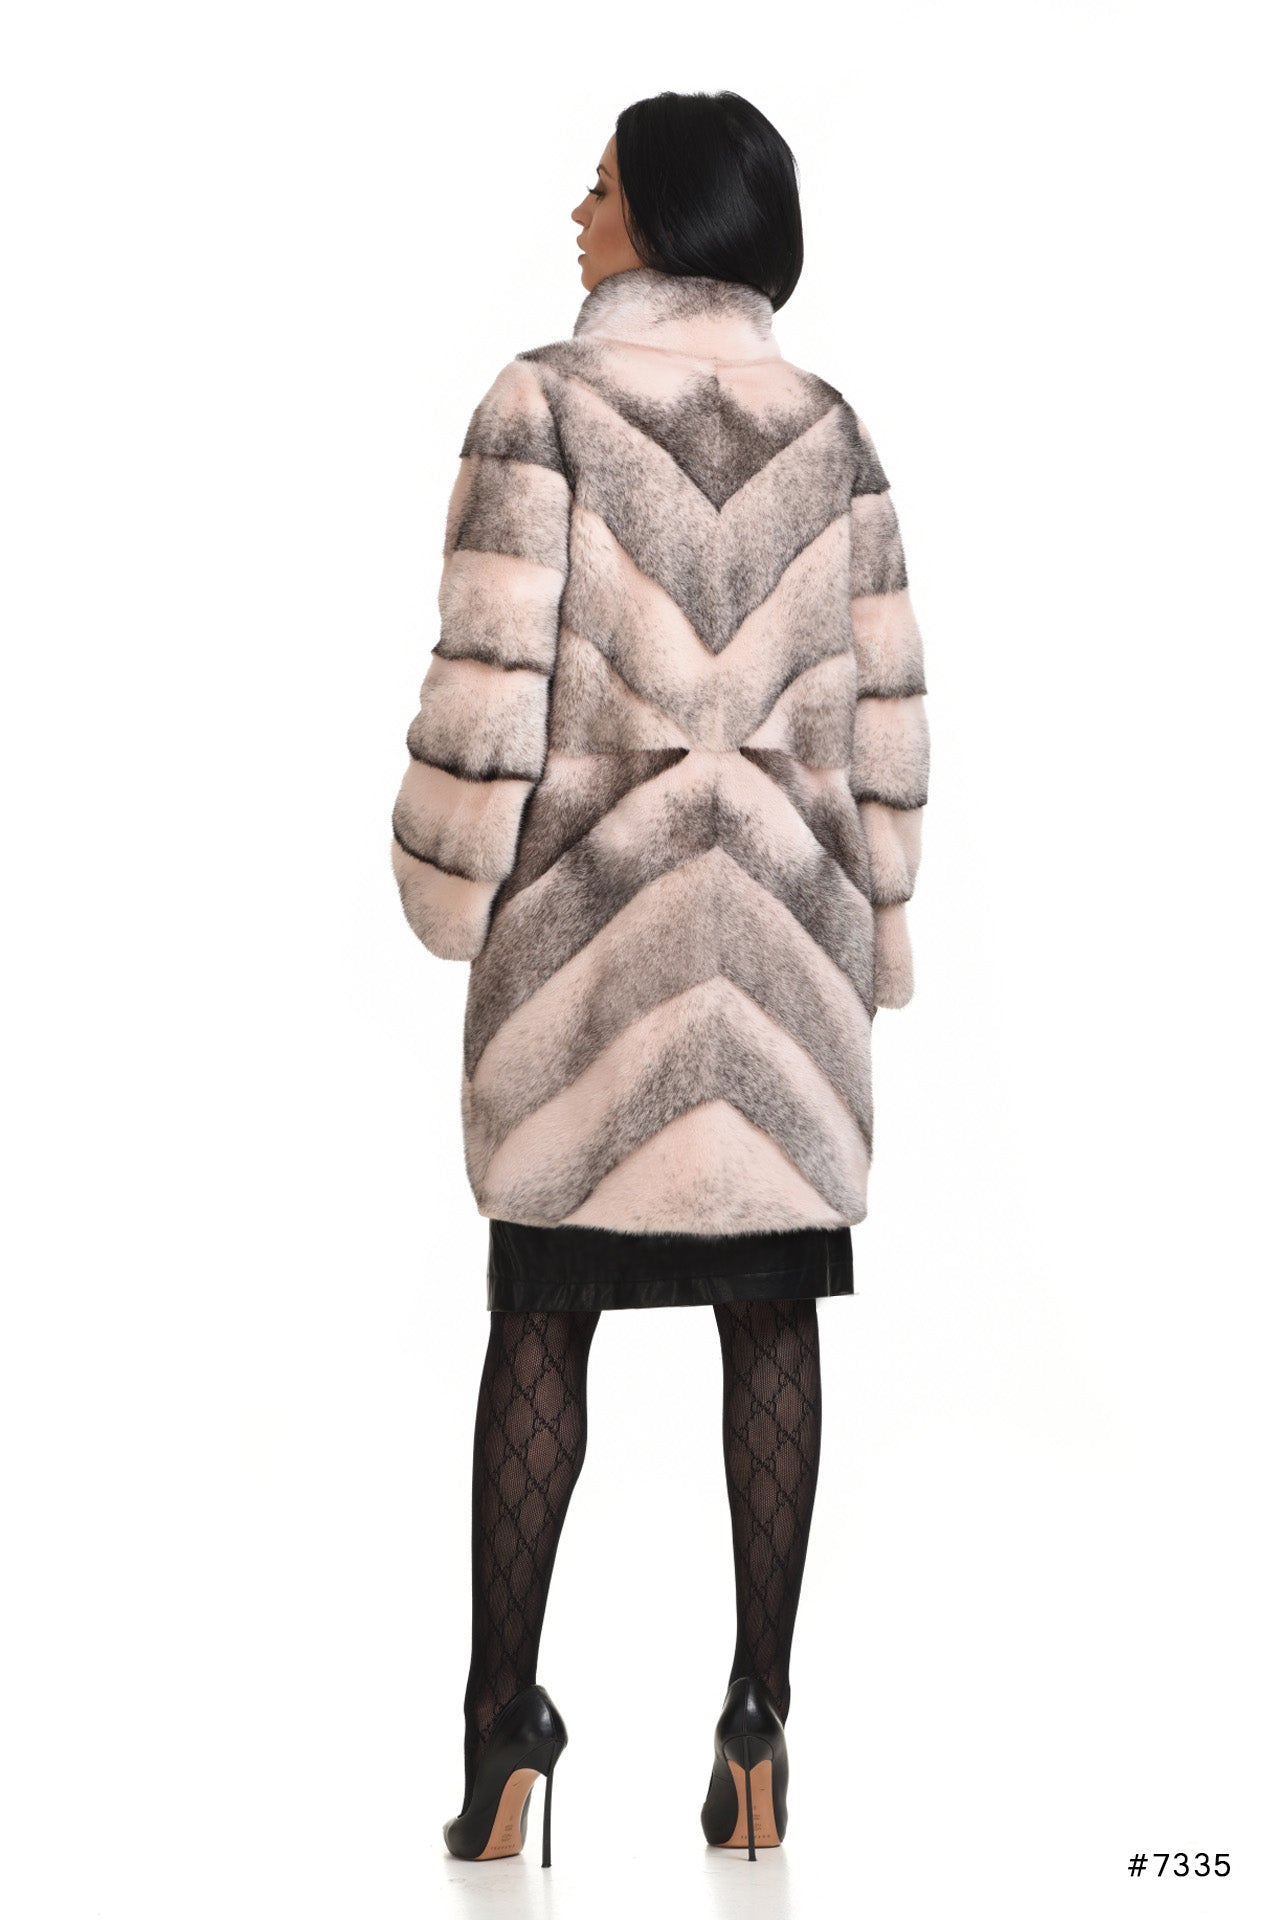 Classy mink coat with stand up collar